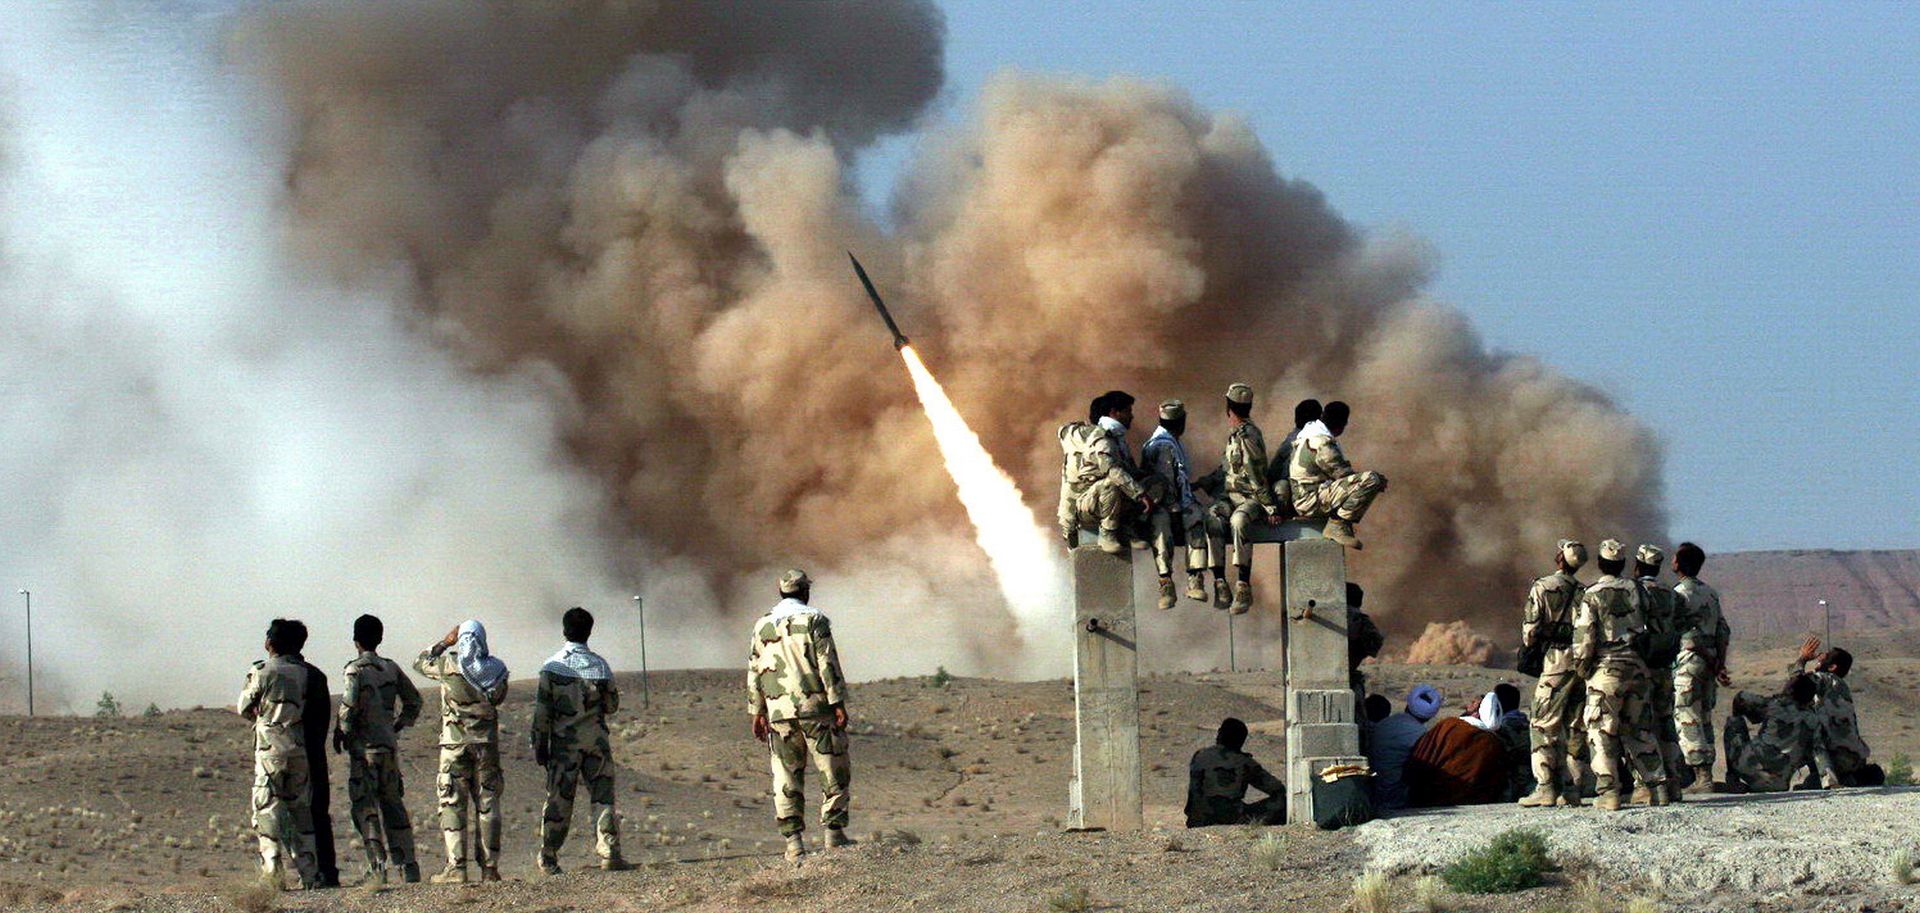 epa08111152 (FILE) - Ballistic missile Zelzal , is launched during the second day of military exercises, codenamed Great Prophet-6, by Iran's elite Revolutionary Guards at an undisclosed location in Iran, 28 June 2011 (Reissued 07 January 2020). According to Iranian state TV on 07 January 2020, Iran's Revolutionary Guard Crops (IRGC) launched a series of rockets targeting Ain al-Assad air base located in al-Anbar, one of the bases hosting US military troops in Iraq. The attack comes days after the Top Irani General Qassem Soleimani, head of the IRGC's Quds force, was killed by a US drone strike in Baghdad.  EPA/STRNGER *** Local Caption *** 02799449